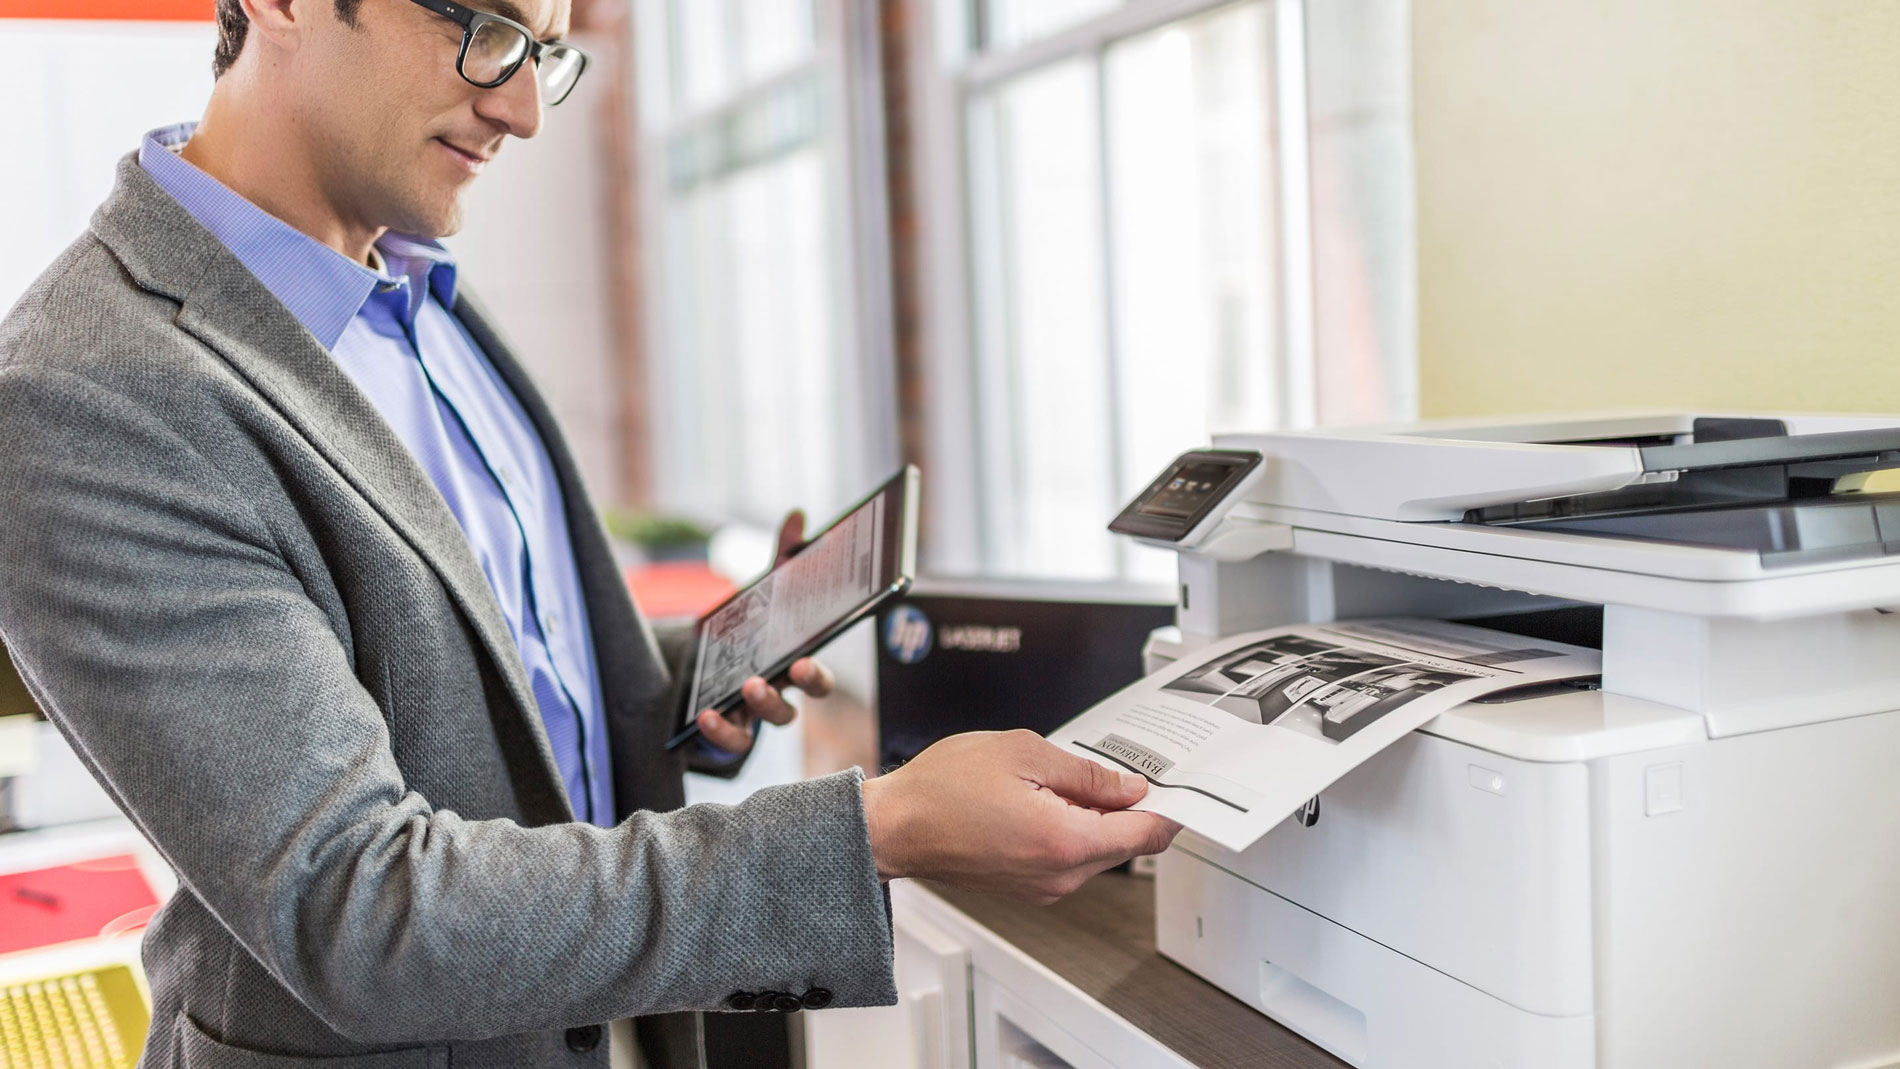 Protect your it infrastructure with hp’s managed print services